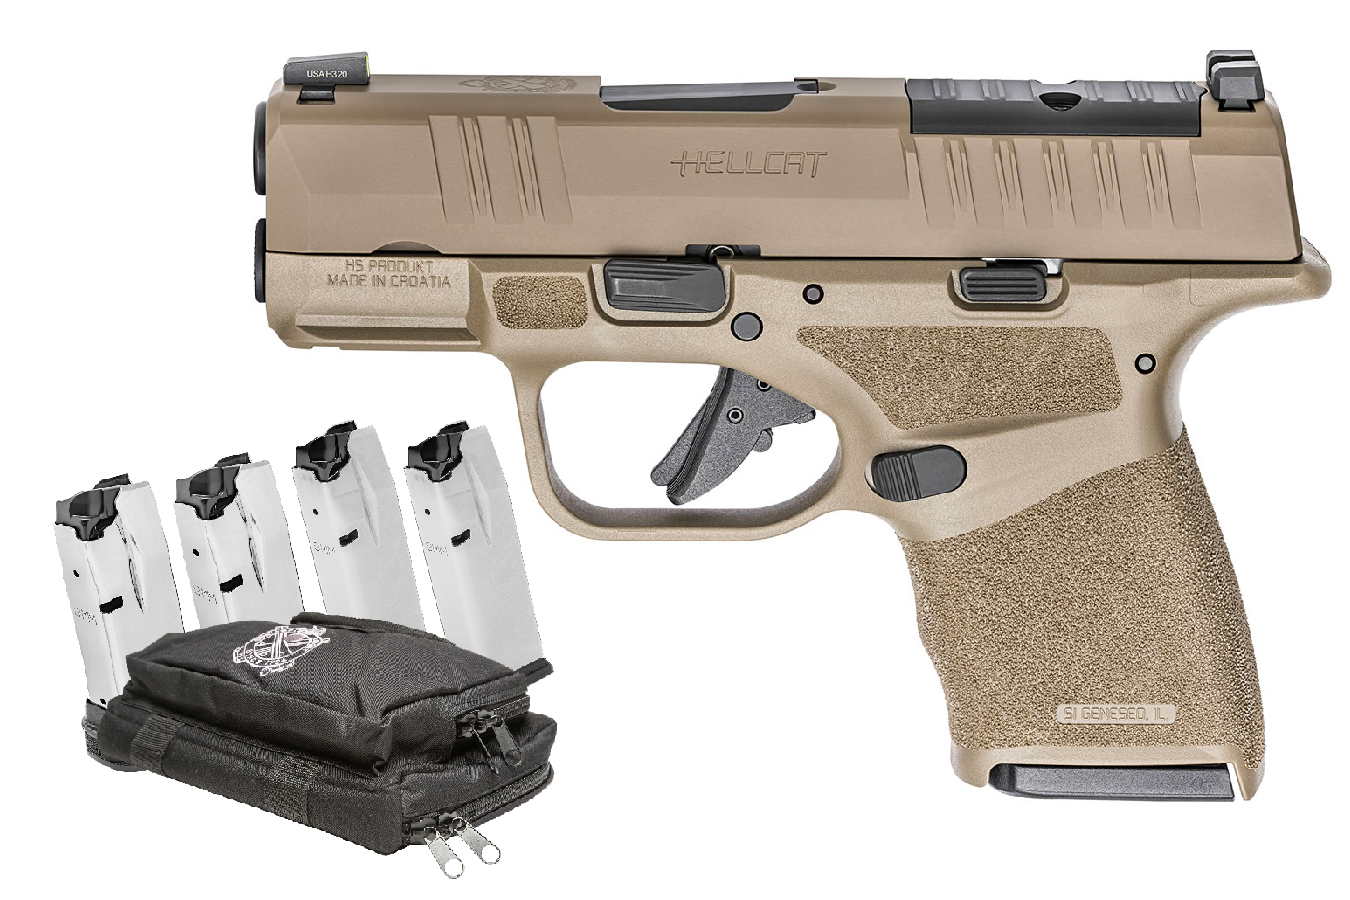 No. 14 Best Selling: SPRINGFIELD HELLCAT MICRO COMPACT 9MM OSP 3` FDE GEAR UP